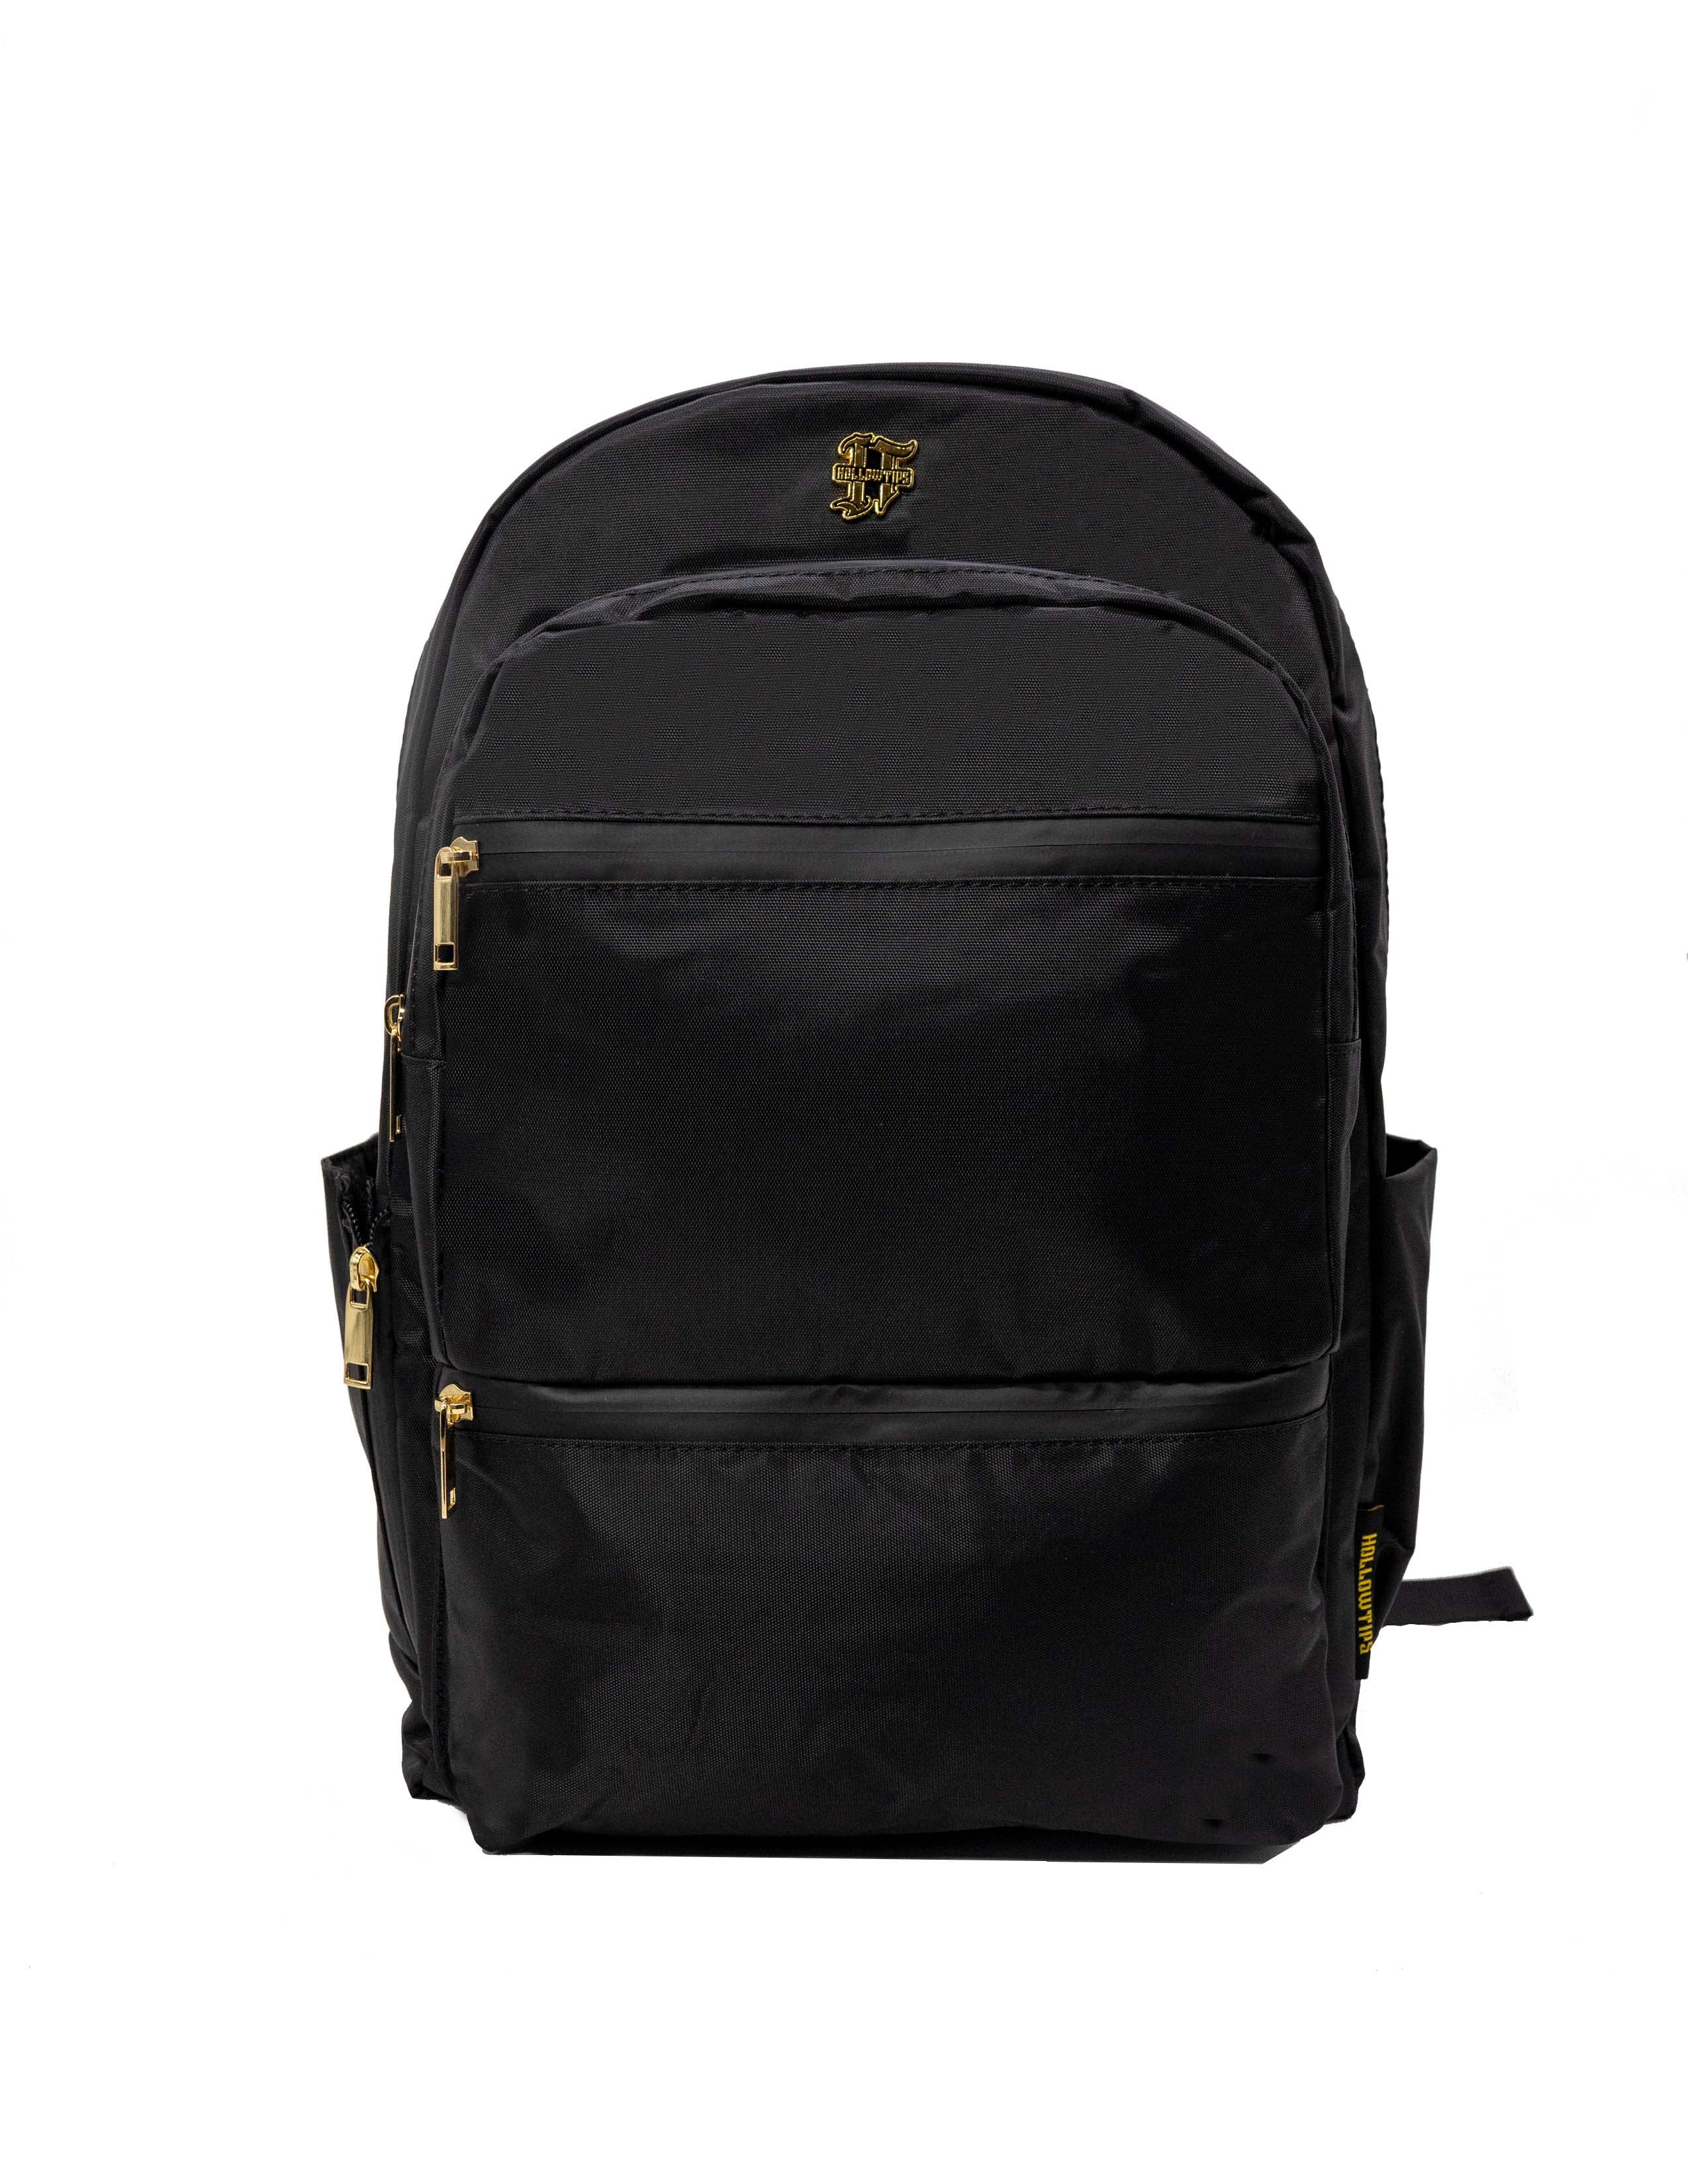 Hollowtips smell proof Backpack